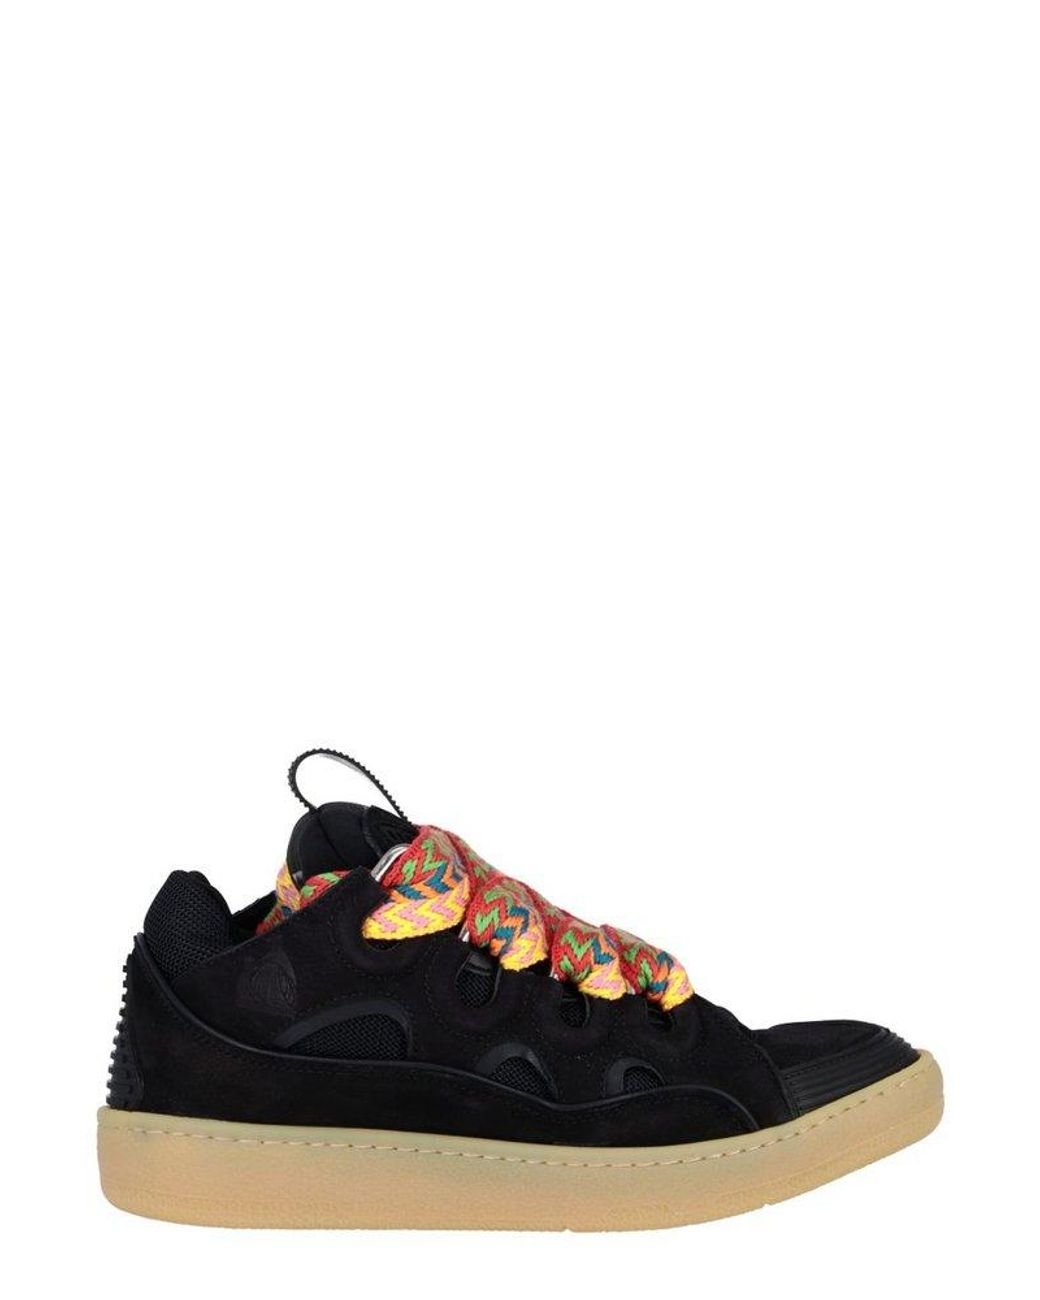 Lanvin Leather Curb Panelled Lace-up Sneakers in Black | Lyst UK